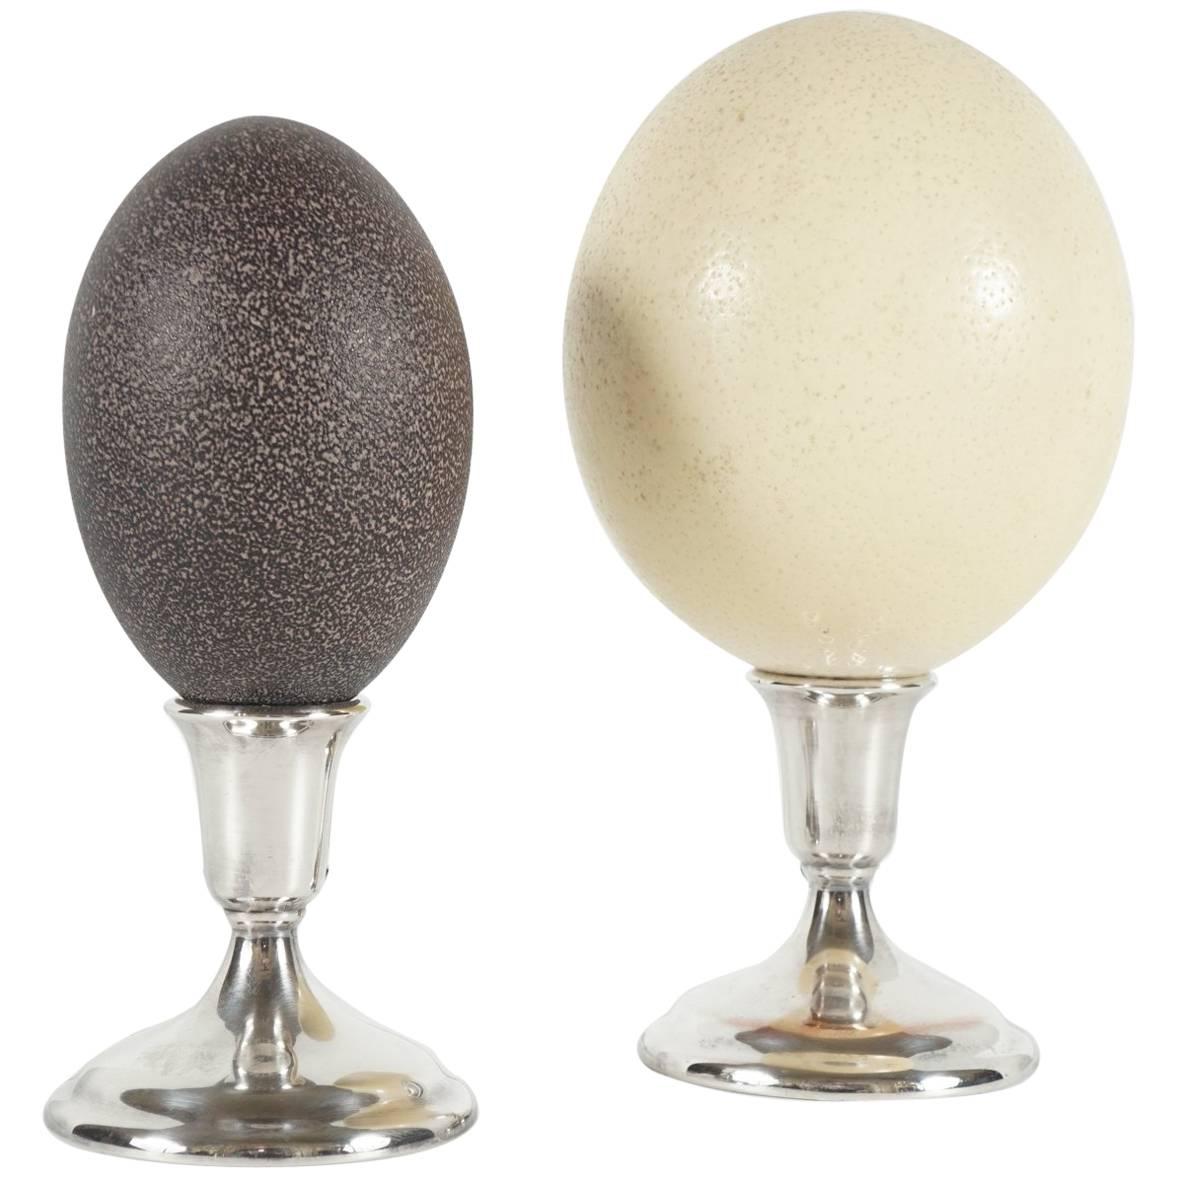 Two Specimen Eggs Mounted on Silver Bases